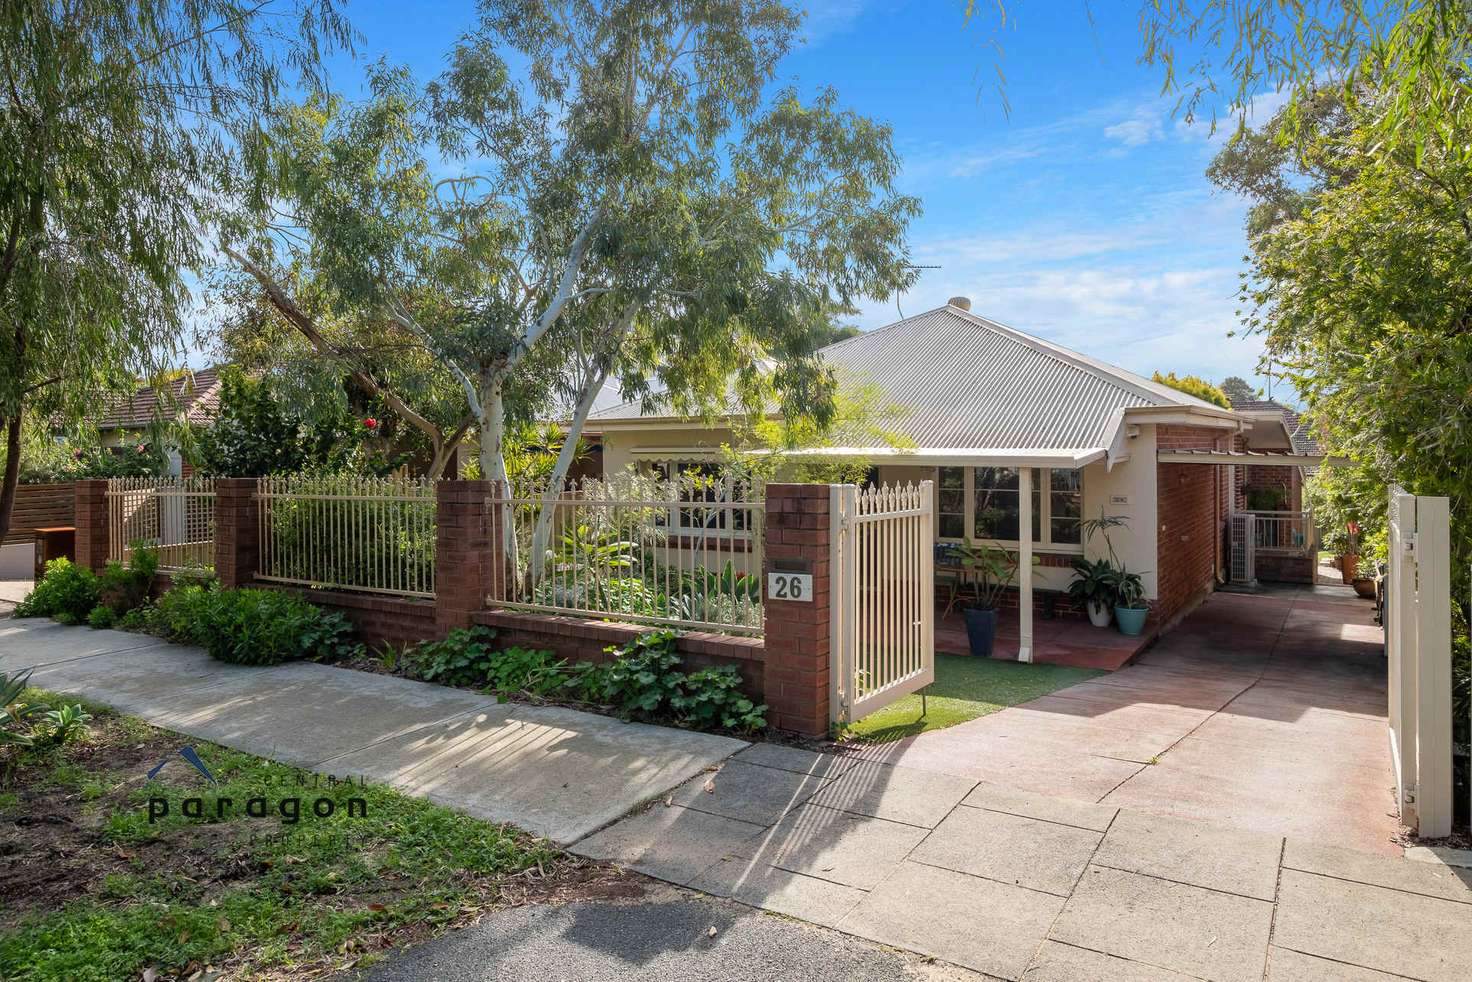 Main view of Homely house listing, 26 Lawler Street, North Perth WA 6006